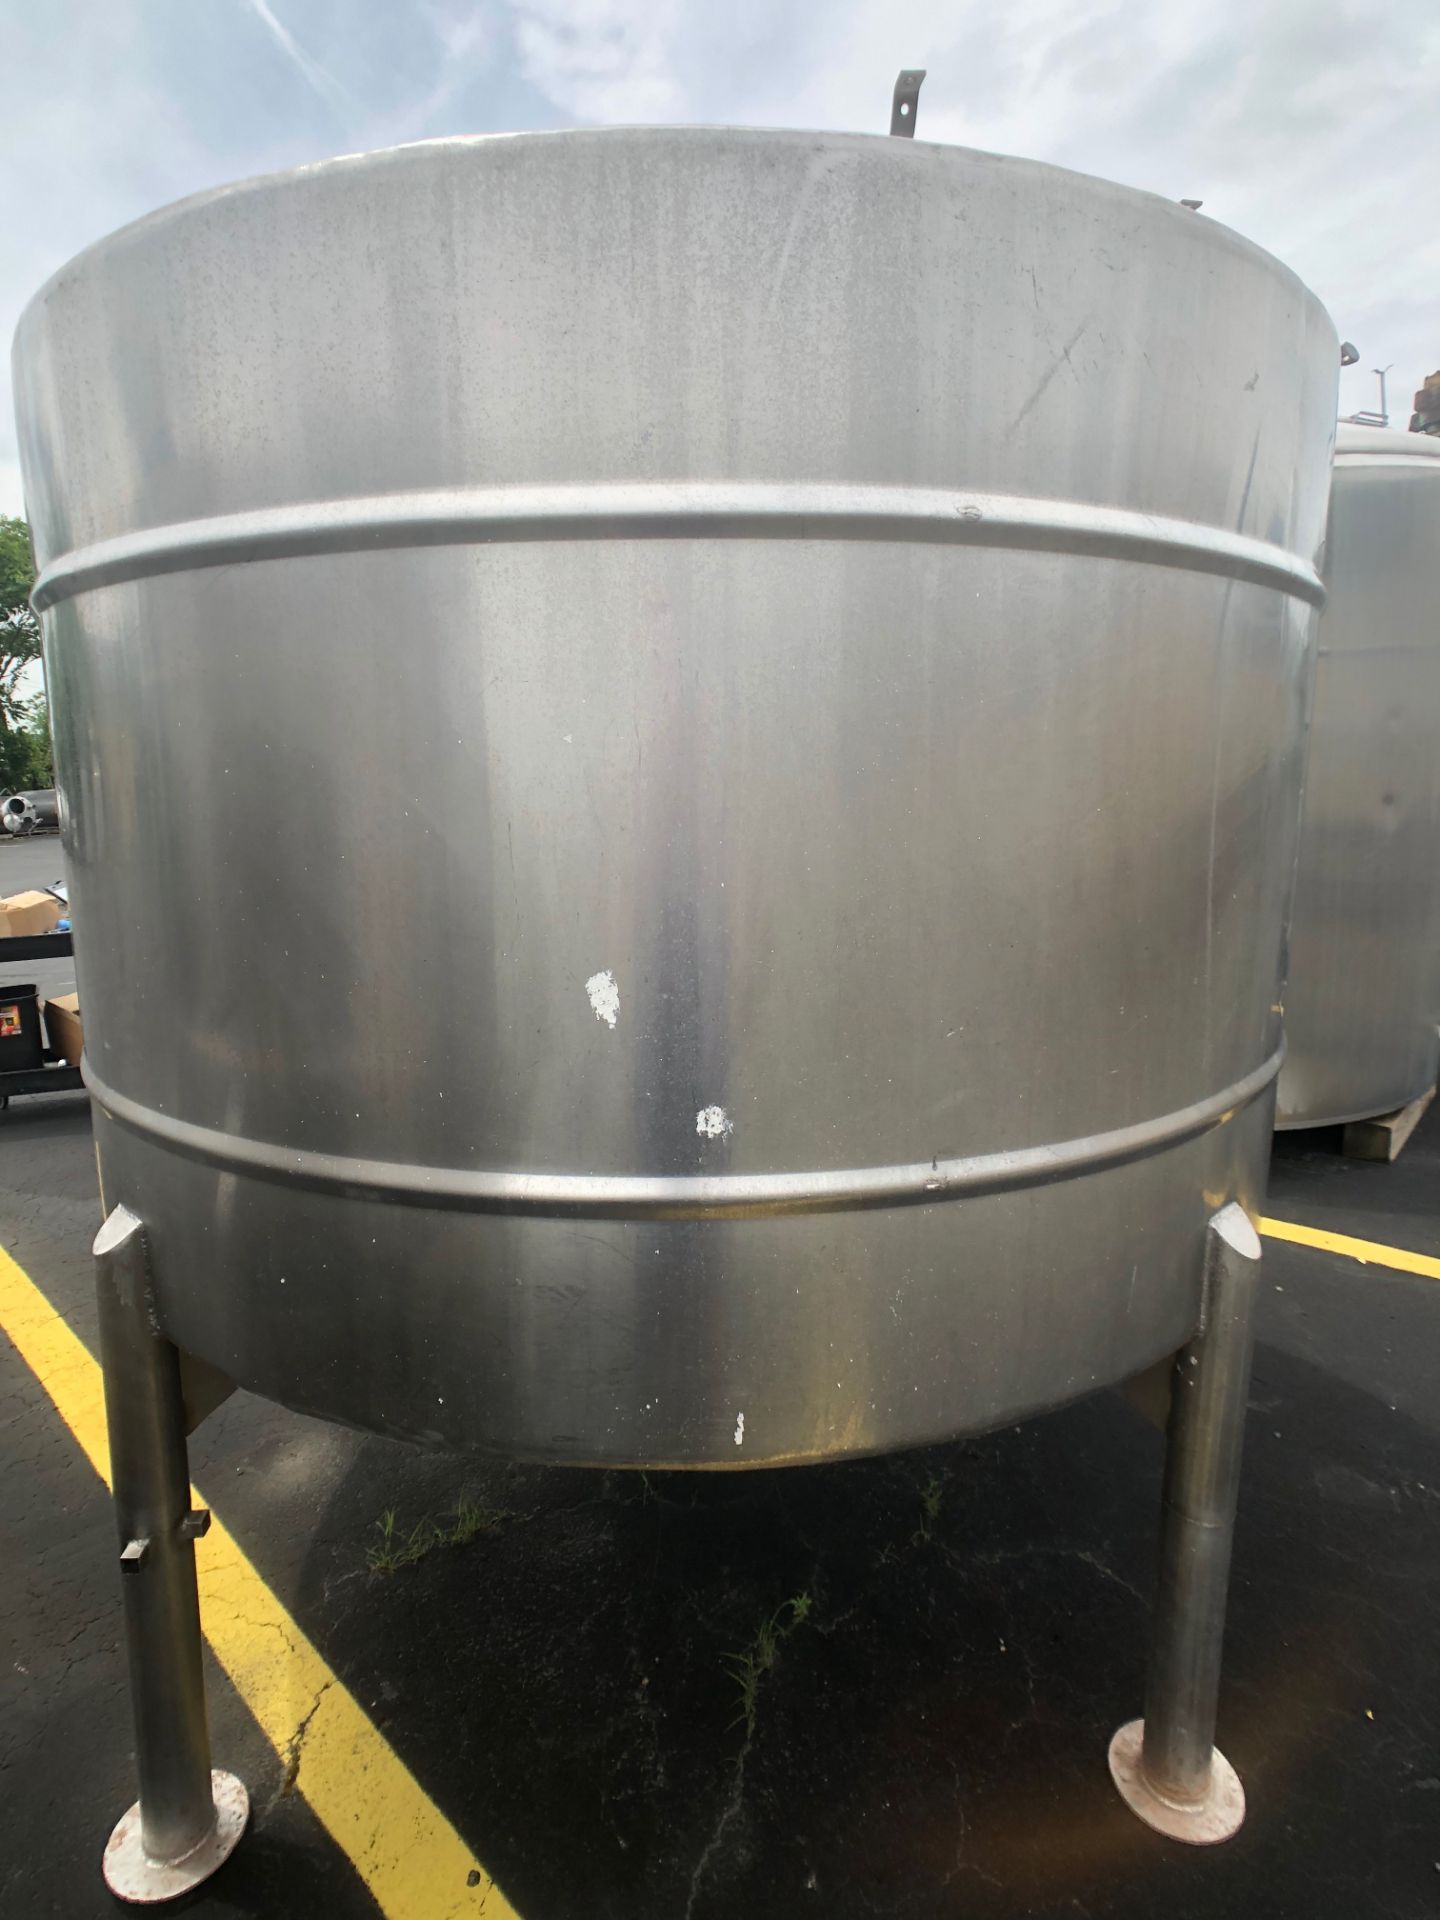 Approx. 1,000 Gallon S/S Mixing Tank, Equipped with Top-Mount Prop Agitation (Rigging and Handling - Image 4 of 4